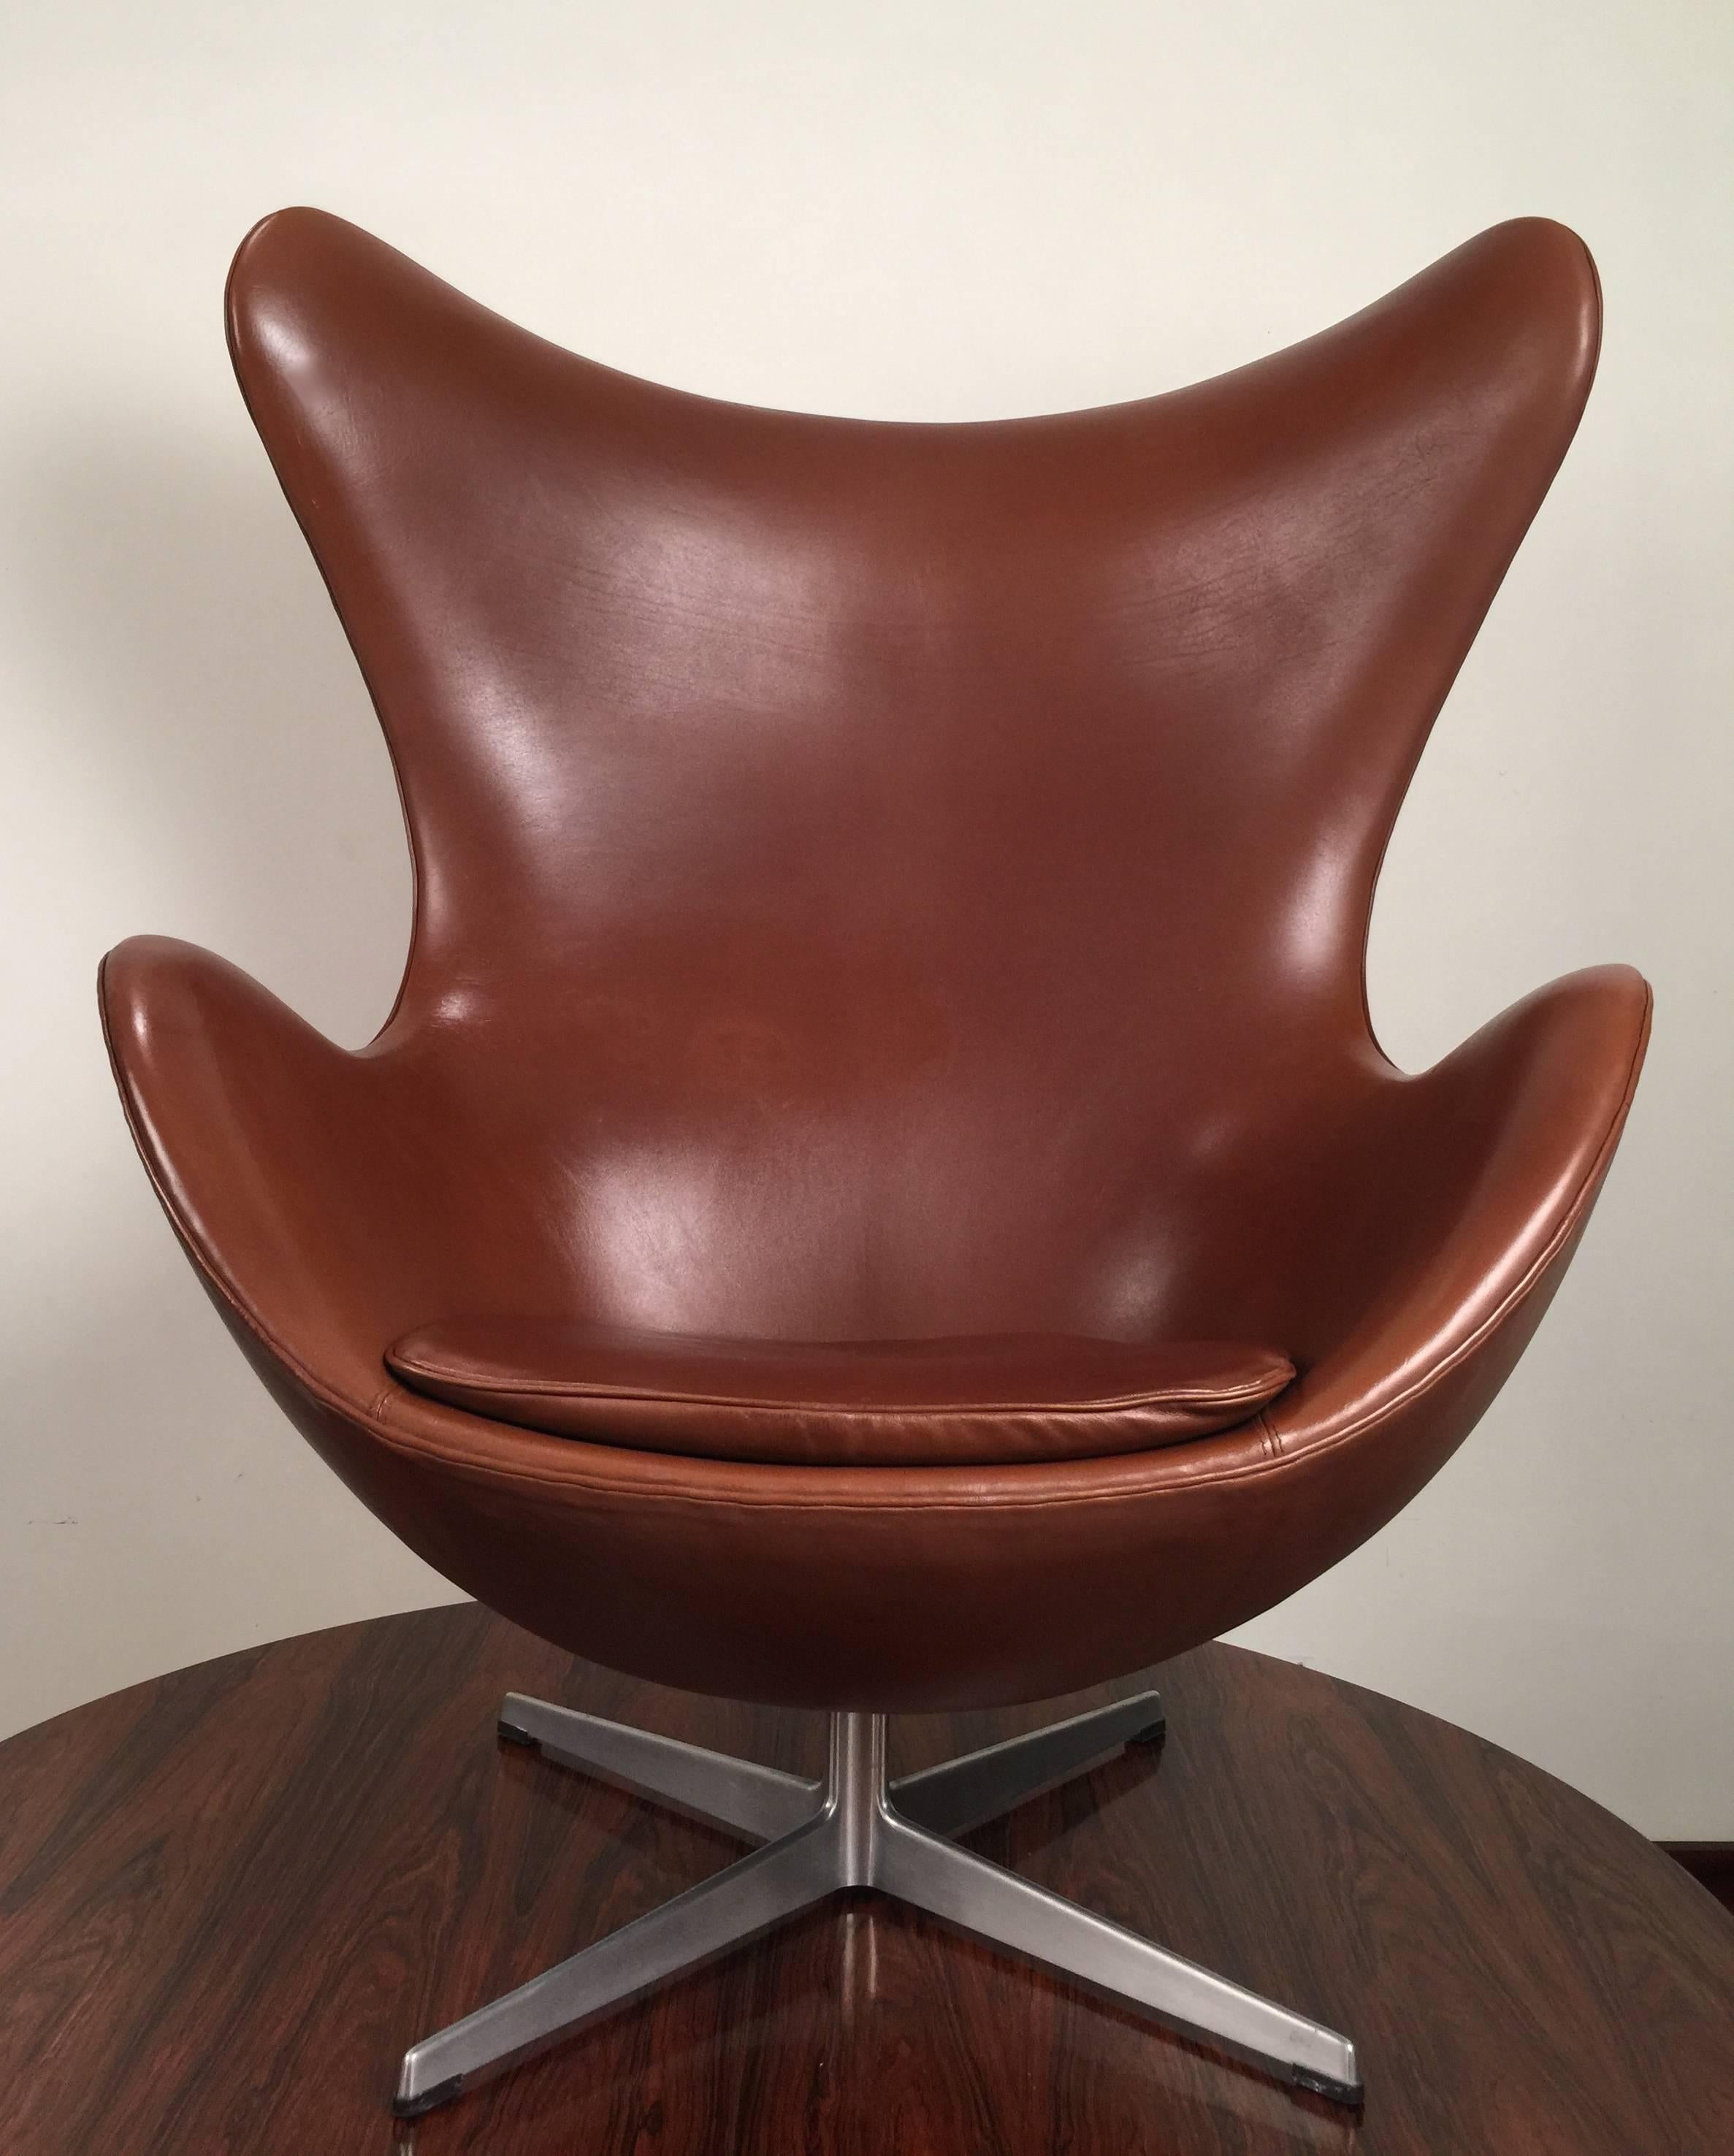 An early brown leather egg chair designed by Arne Jacobsen and produced in 1967 by Fritz Hansen on a four star aluminium swivel base. The chair retains its original brown leather and a lovely patina from age and use. Unlike contemporary egg chairs,